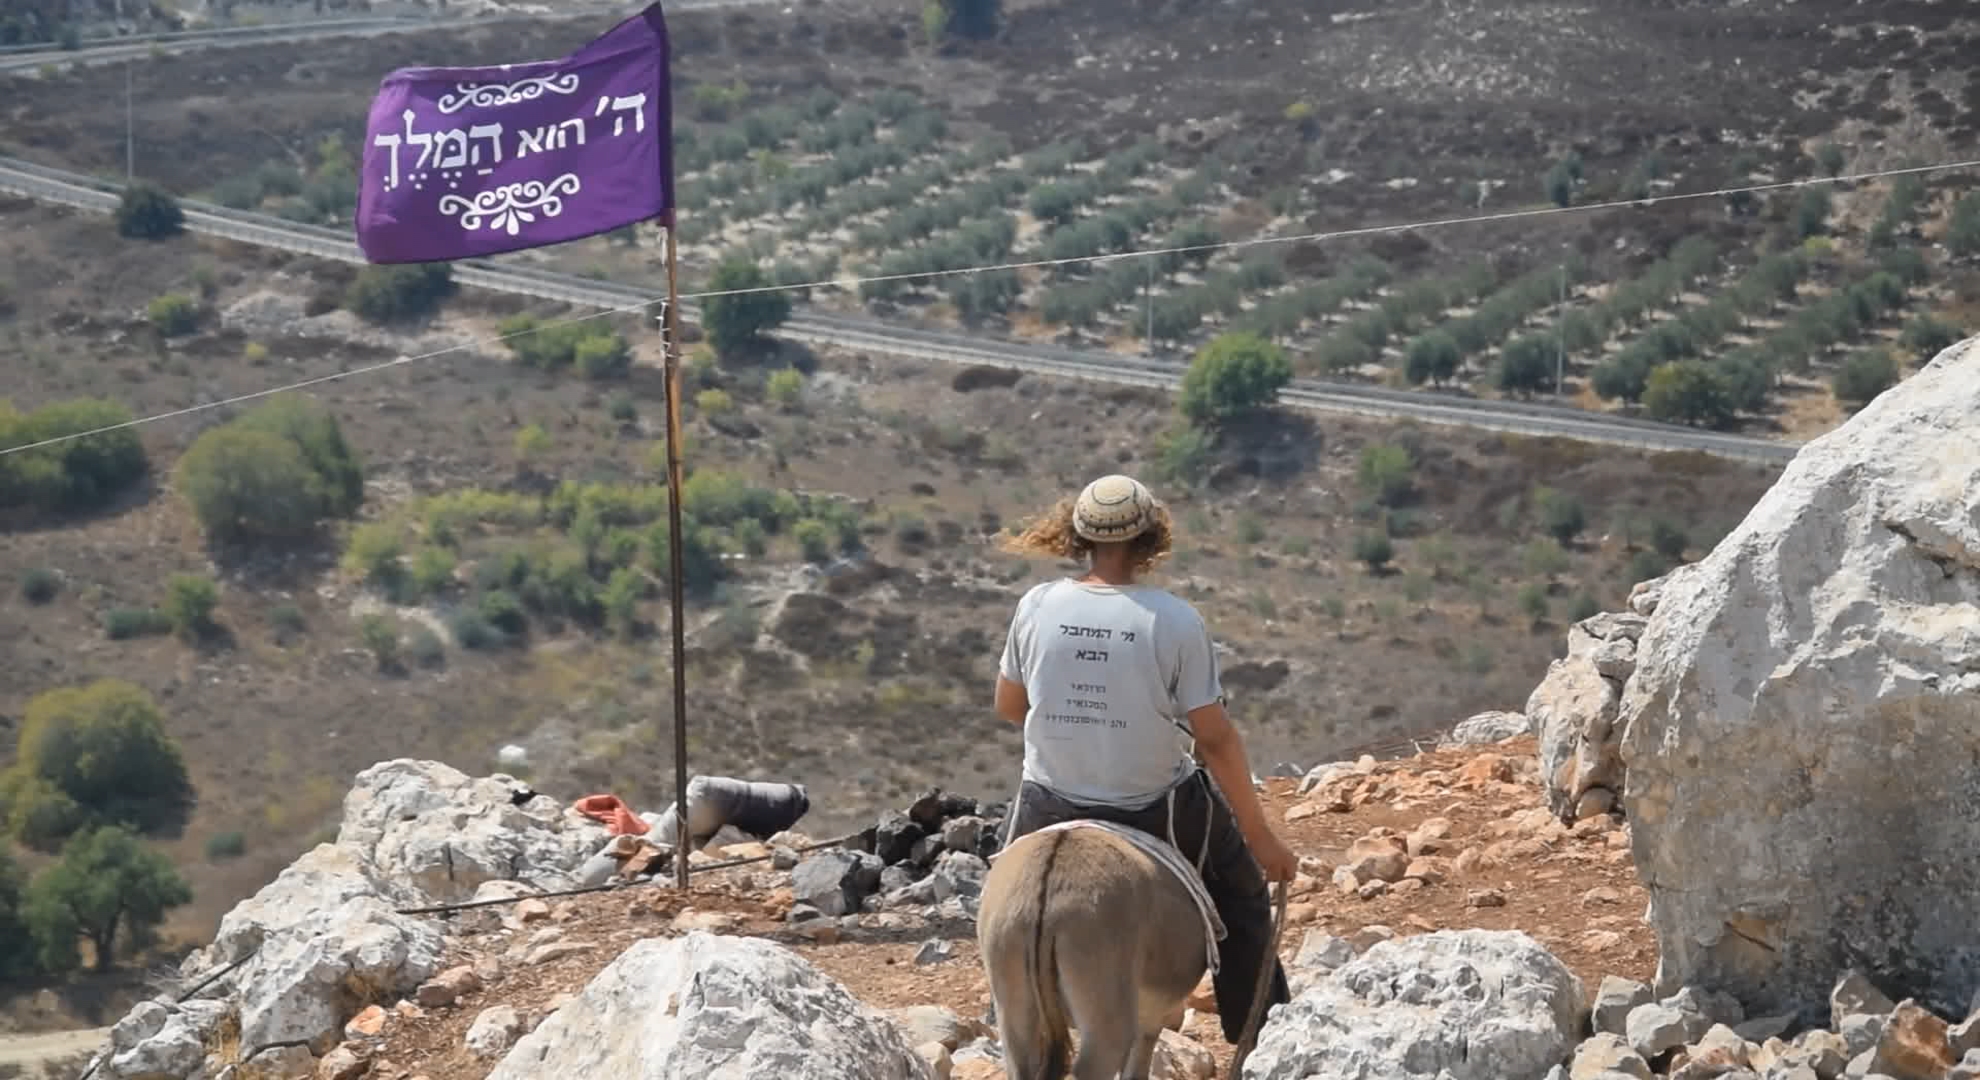 Illustrative: A member of the 'hilltop youth' rides a donkey at an illegal outpost in the northern West Bank. (Credit: Zman Emet, Kan 11)